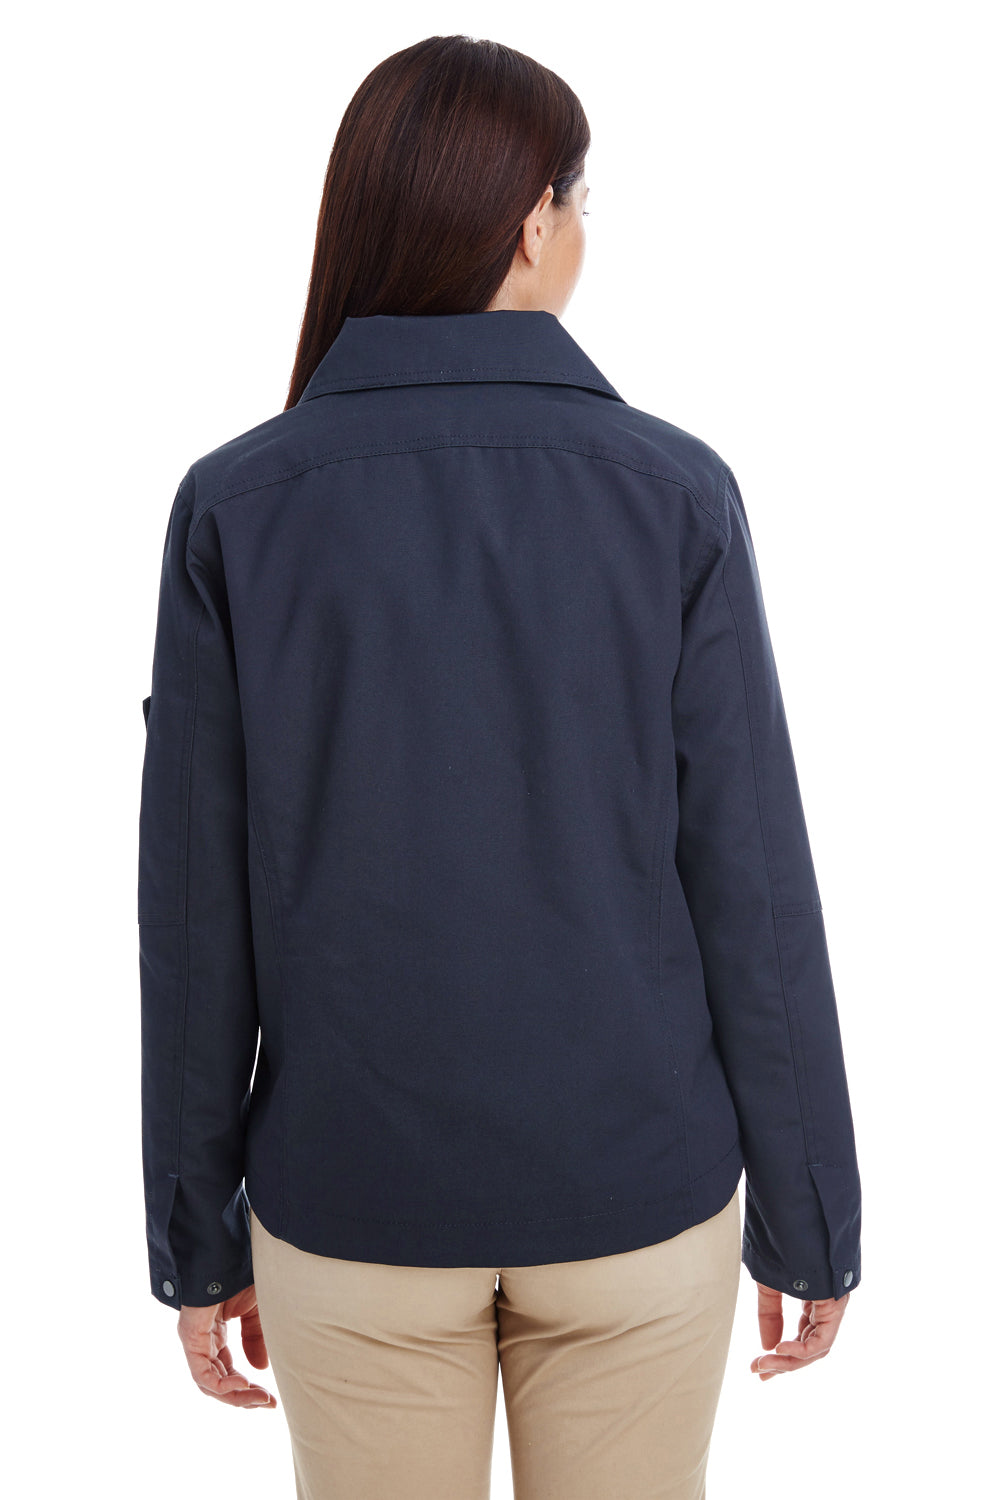 Harriton M705W Womens Auxiliary Water Resistant Canvas Full Zip Jacket Navy Blue Back